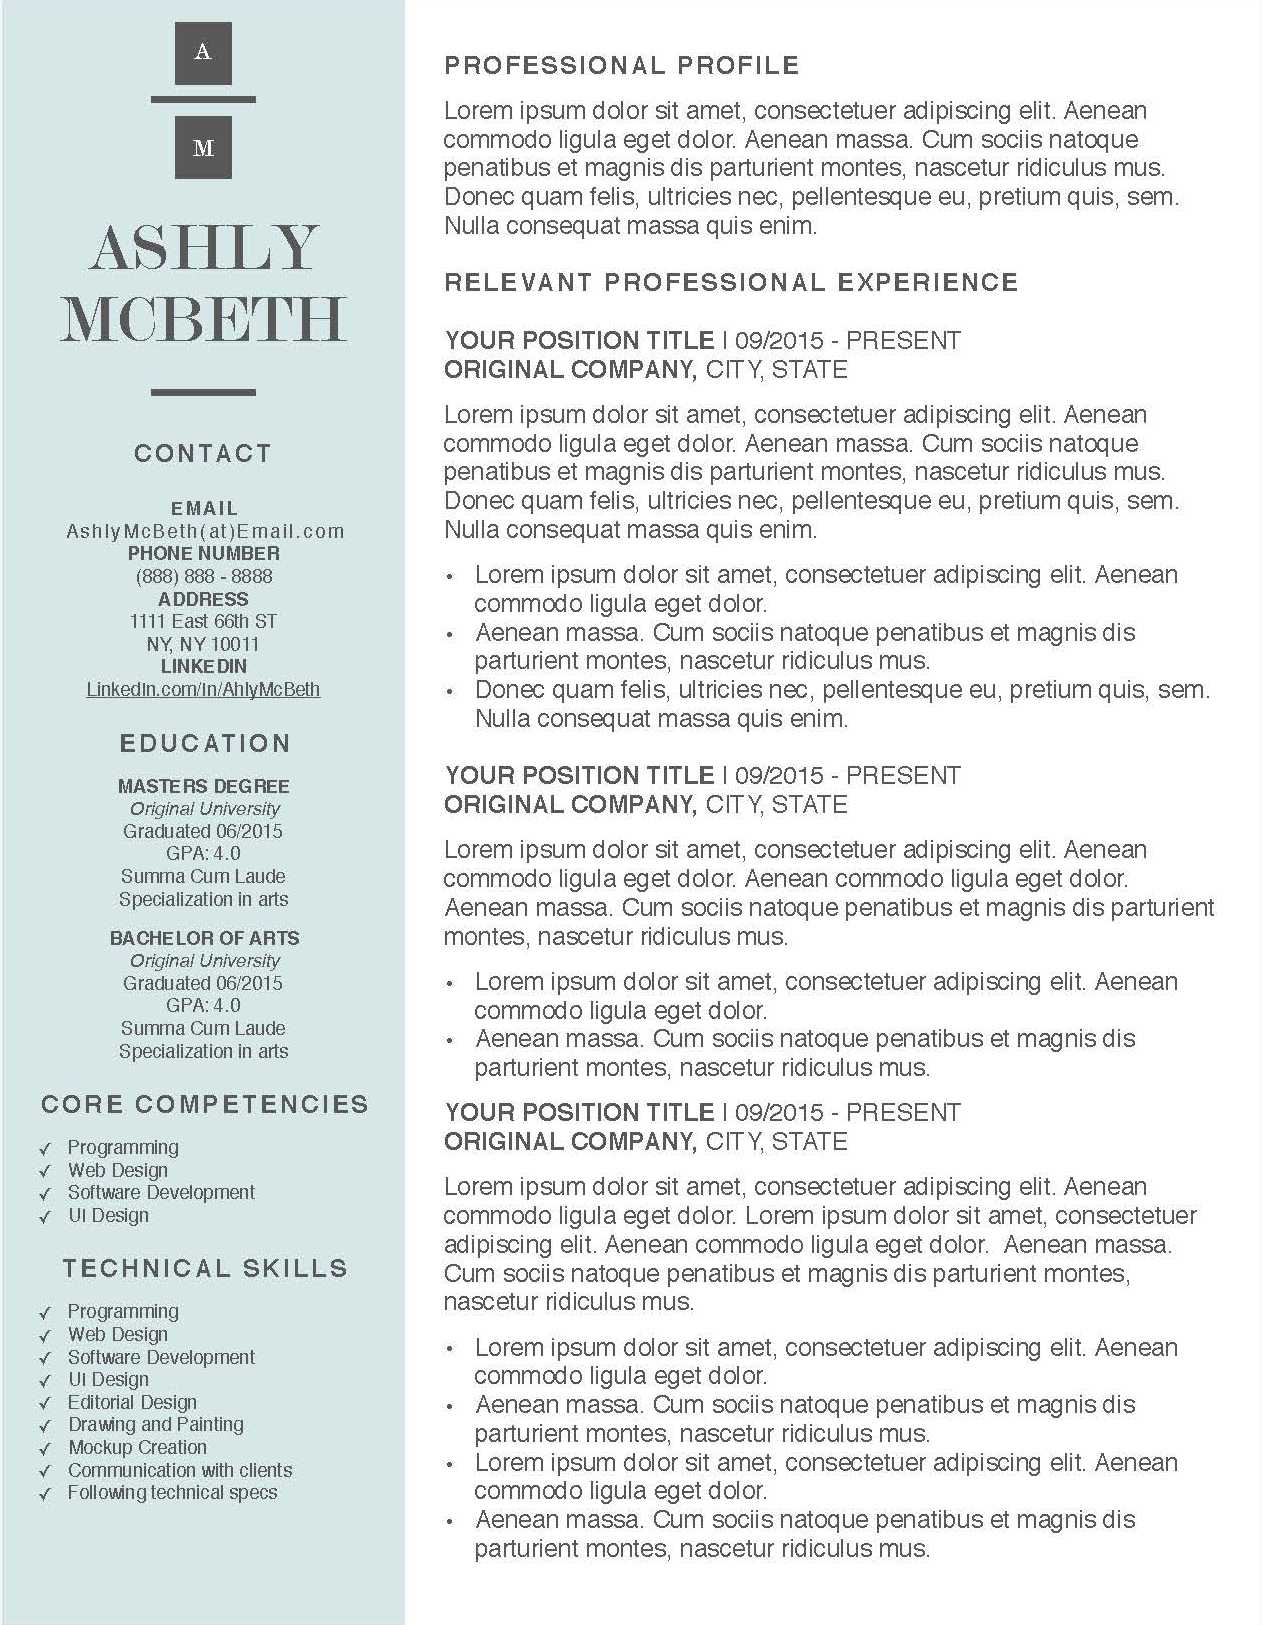 Ashly McBeth - Downloadable Resume + Cover Template and Cover Letter Template for Microsoft Word and Apple Pages. This cover letter template is perfect for anyone in the fashion field. The template’s design is a modern, unique, colorful, and professional. WE SWEAT THE DETAILS, SO YOU DON’T HAVE TO Stand Out Shop resume templates for Microsoft Word and Apple Pages will help you design a modern and professional resume in minutes! Simply download, open in Microsoft Word or Apple Pages, and input your resume’s information. Increase your chances of landing your dream job with a job winning, modern, simple, and scannable resume template for Microsoft Word and Apple Pages. Creating a resume shouldn’t suck Simply download a resume template from Stand Out Shop, enter your information in Microsoft Word or Apple Pages and get a beautifully formatted resume in seconds. Create a unique and vivid resume in minutes. Make an impressive resume. Customize your own layout in Microsoft Word or Apple Pages and introduce yourself in an impressive way. You can download your resume at any time. Stand out from other job seekers with a beautiful professional design.